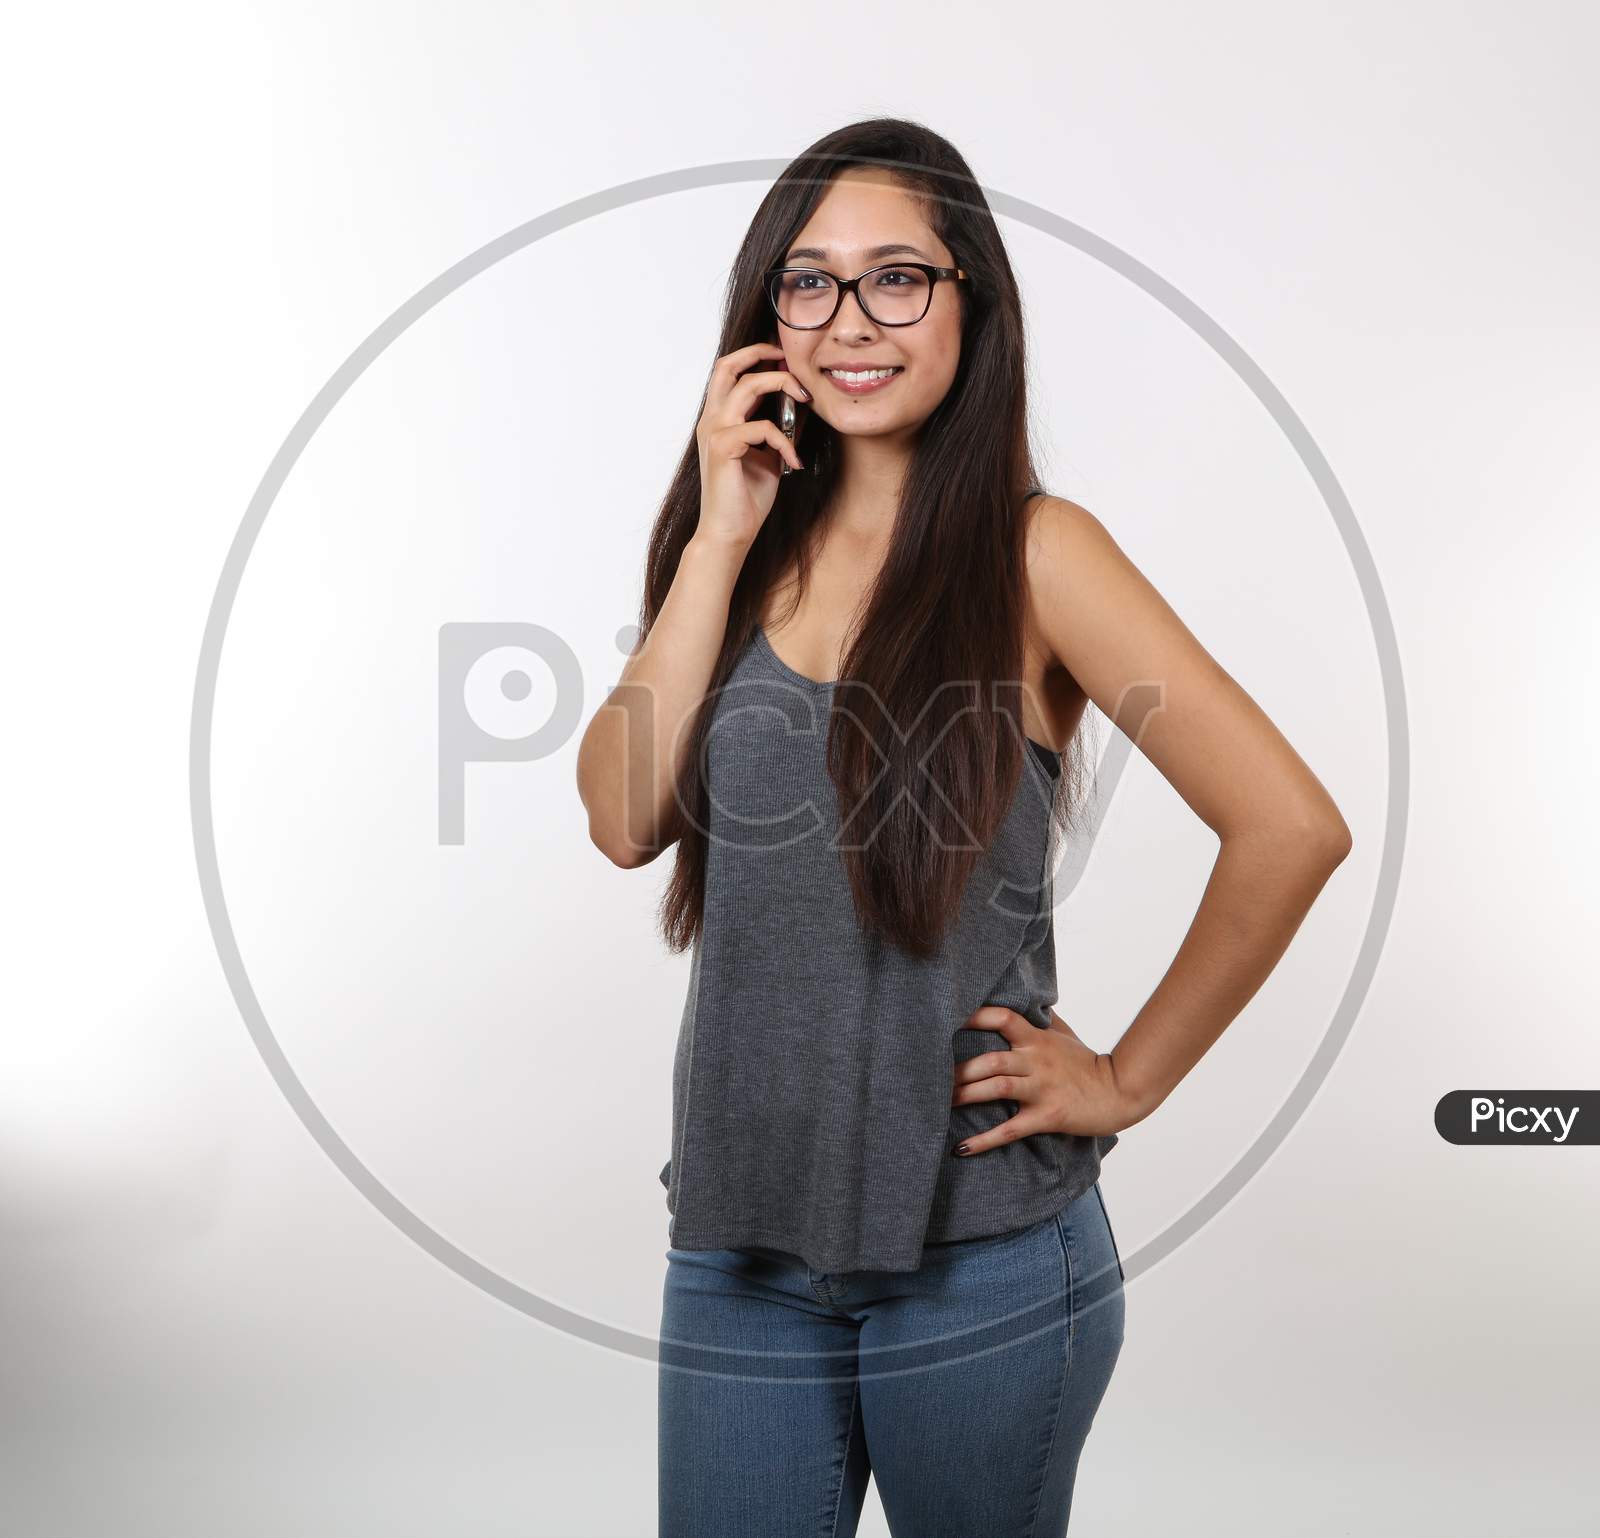 A Young Girl In Jeans And Glasses Smiles As She Hold Her Cell Phone Close To Her Ear.